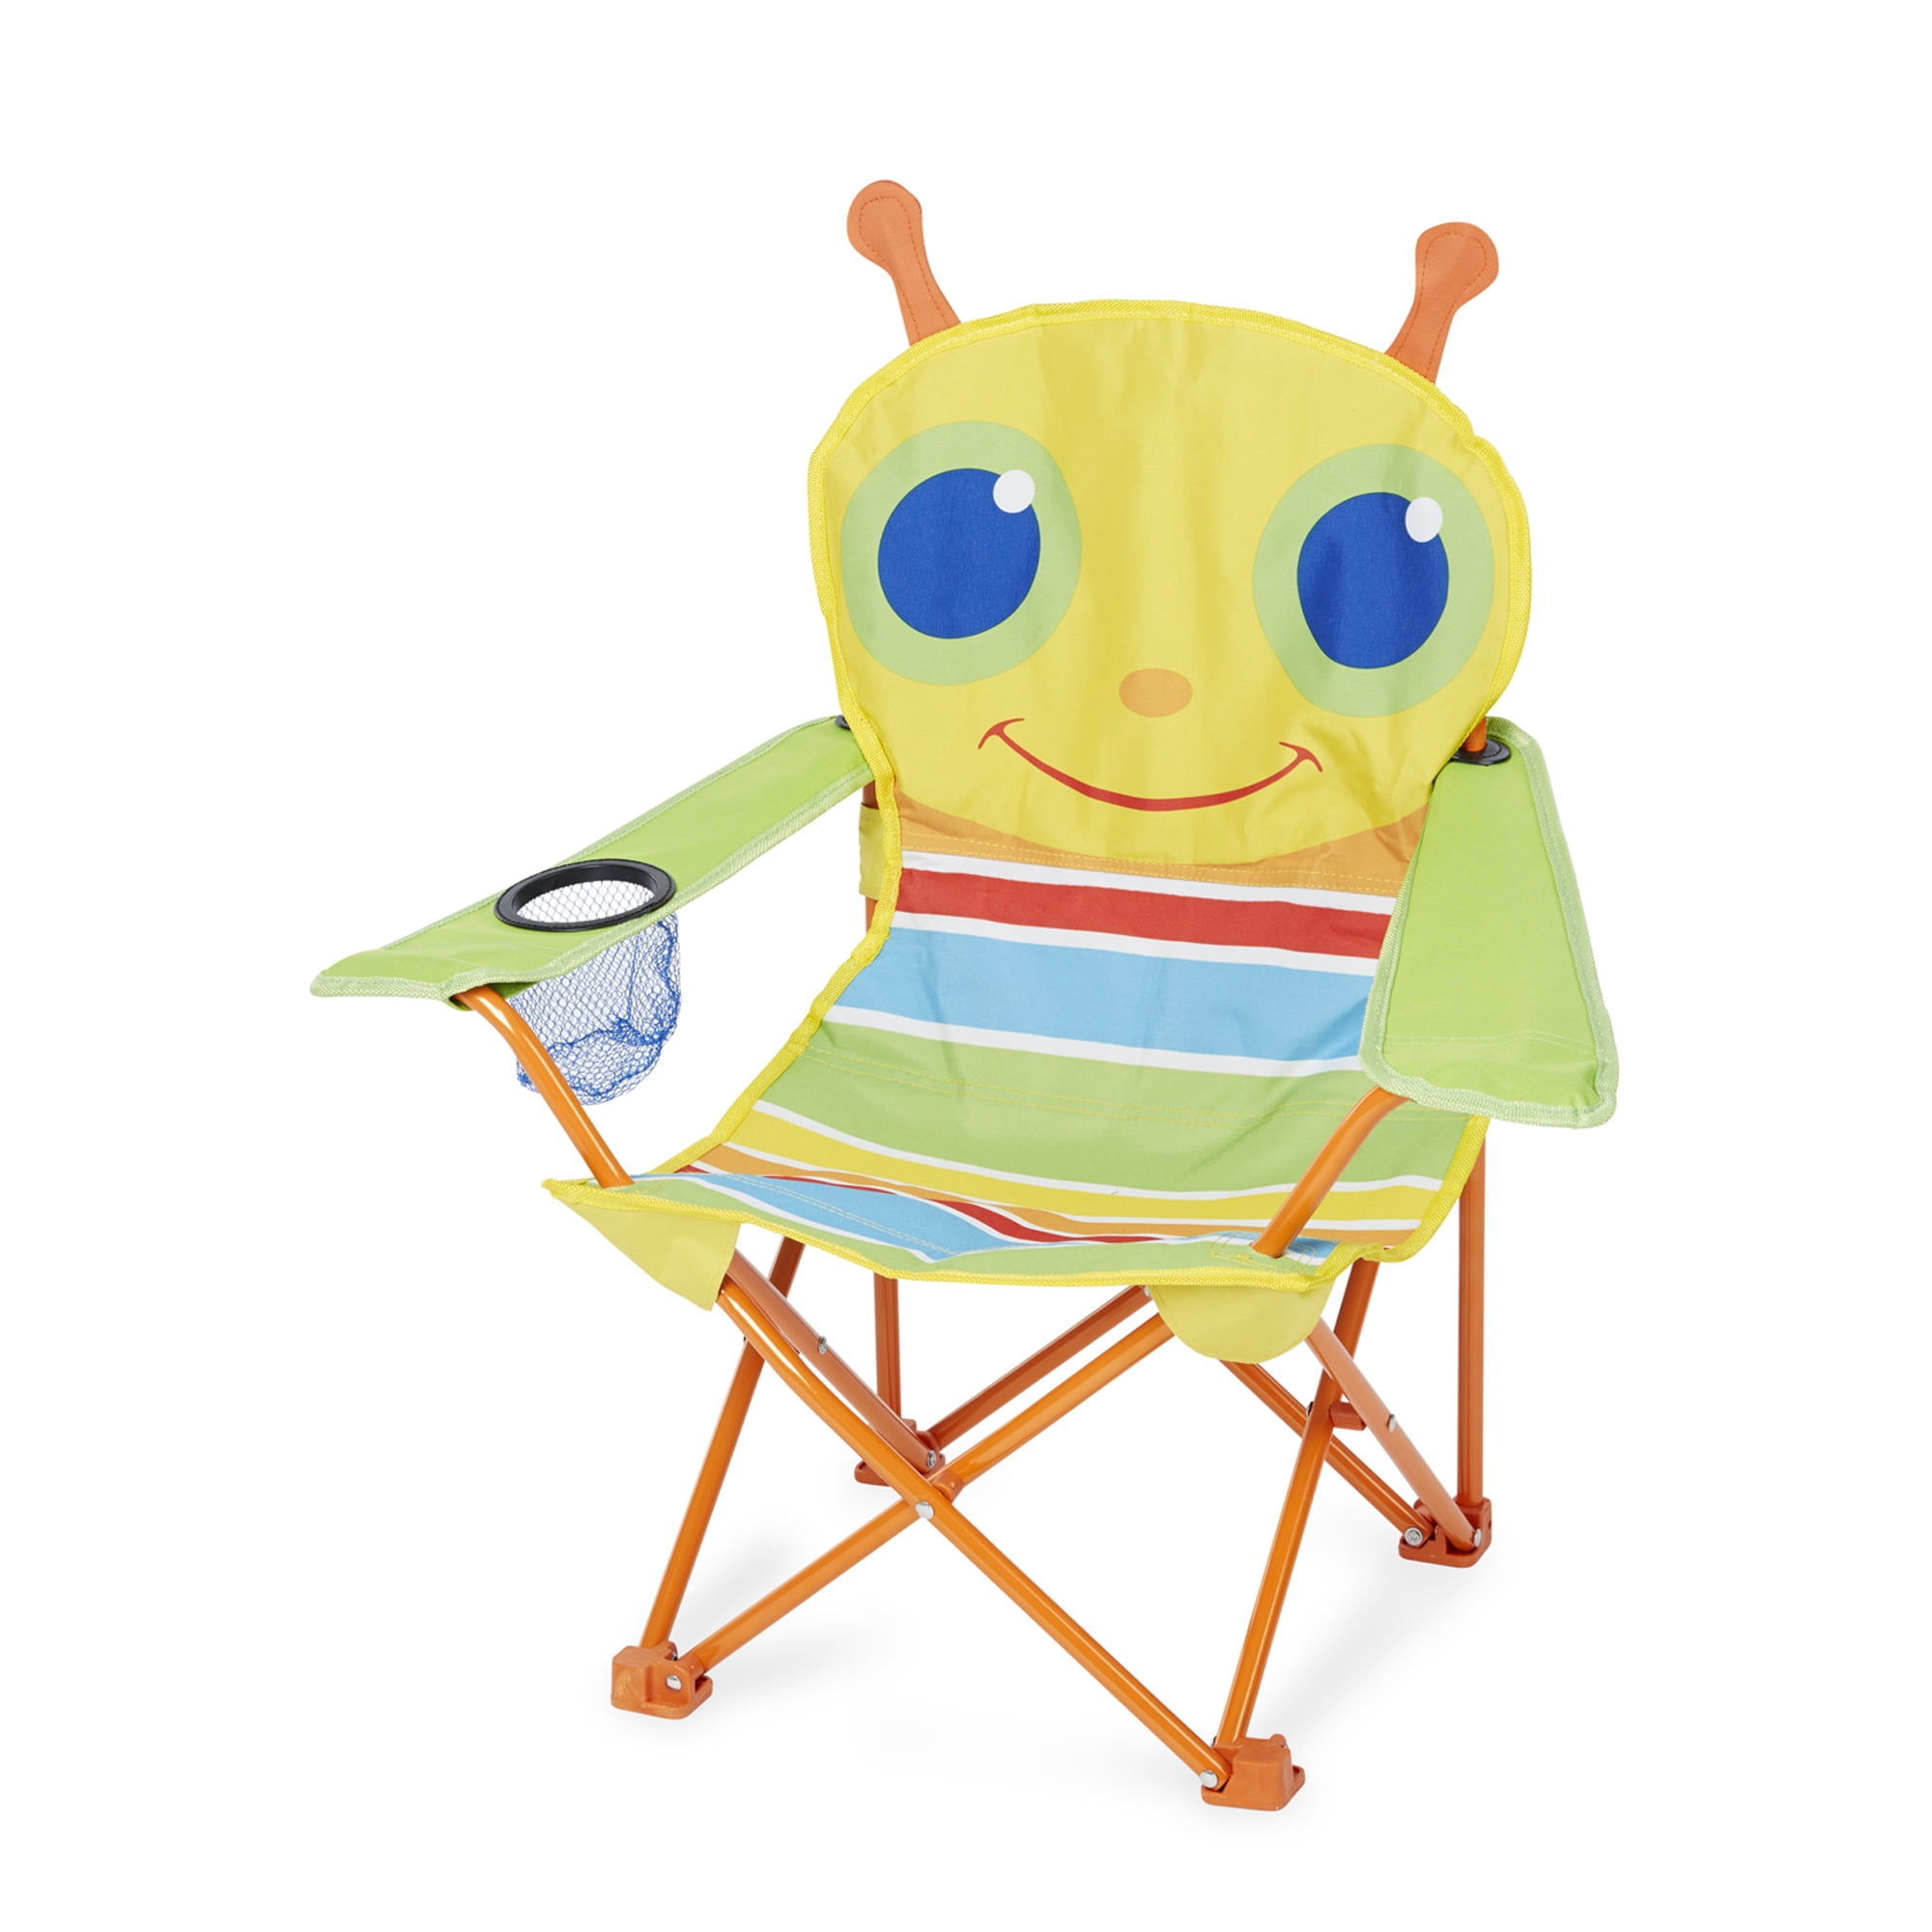 Melissa & Doug Giddy Buggy Umbrella for Kids With Safety Open and Close 